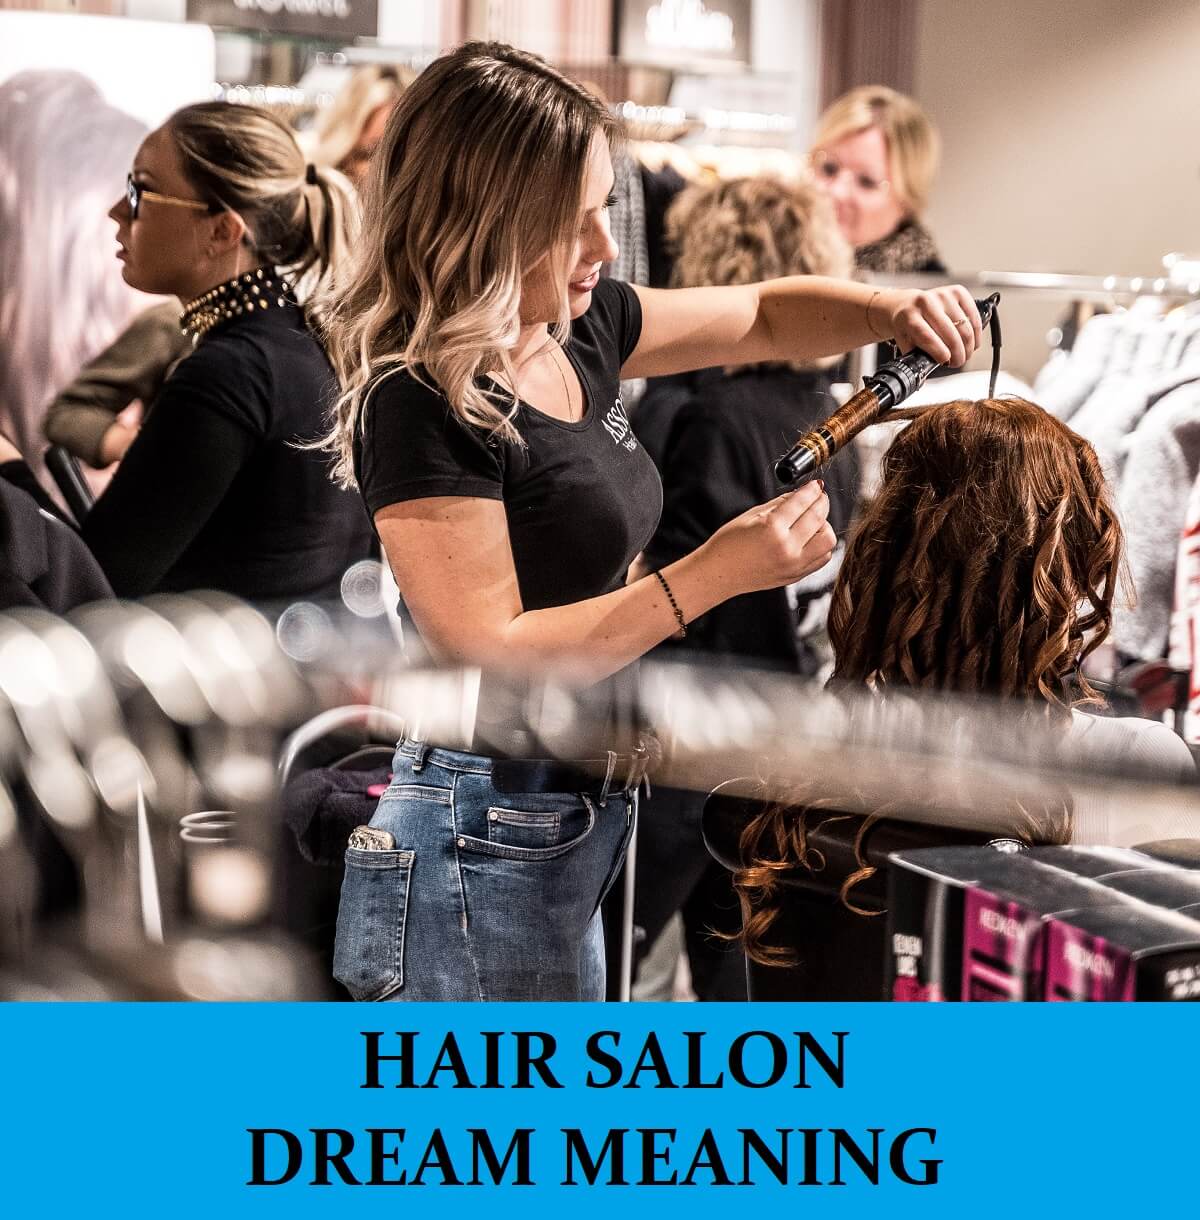 Dream About Barbers or Hair Salons